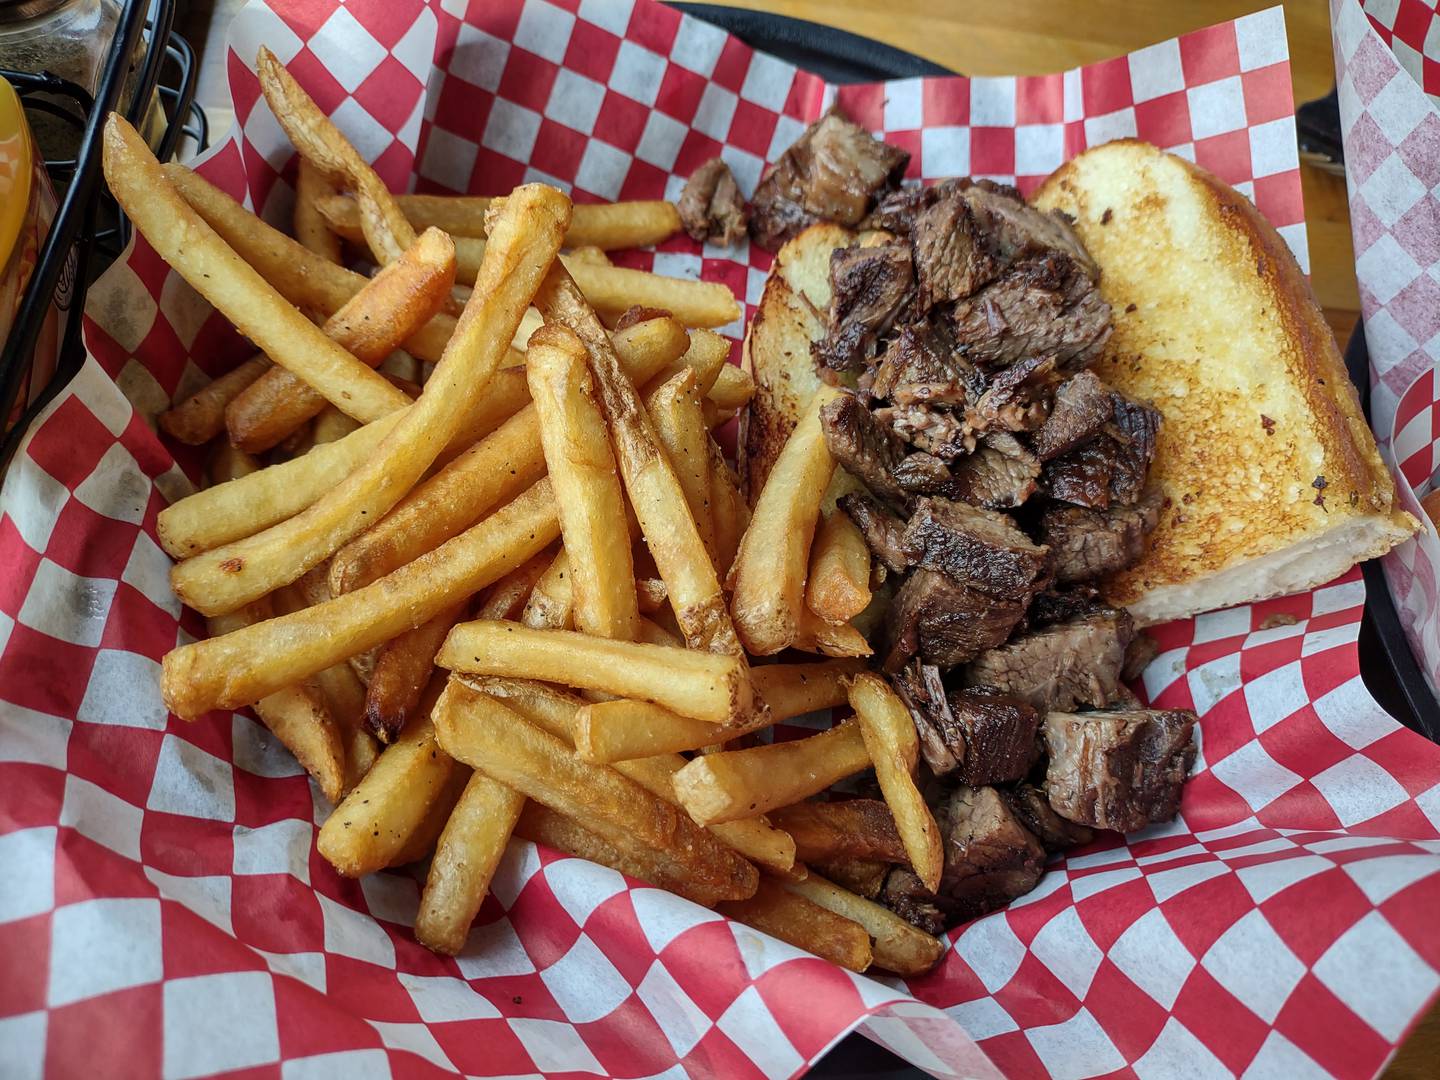 The garlic pot roast sandwich at Weits Cafe in Morris featured almost prime-rib like squares of beef on a garlic infused hoagie bun.